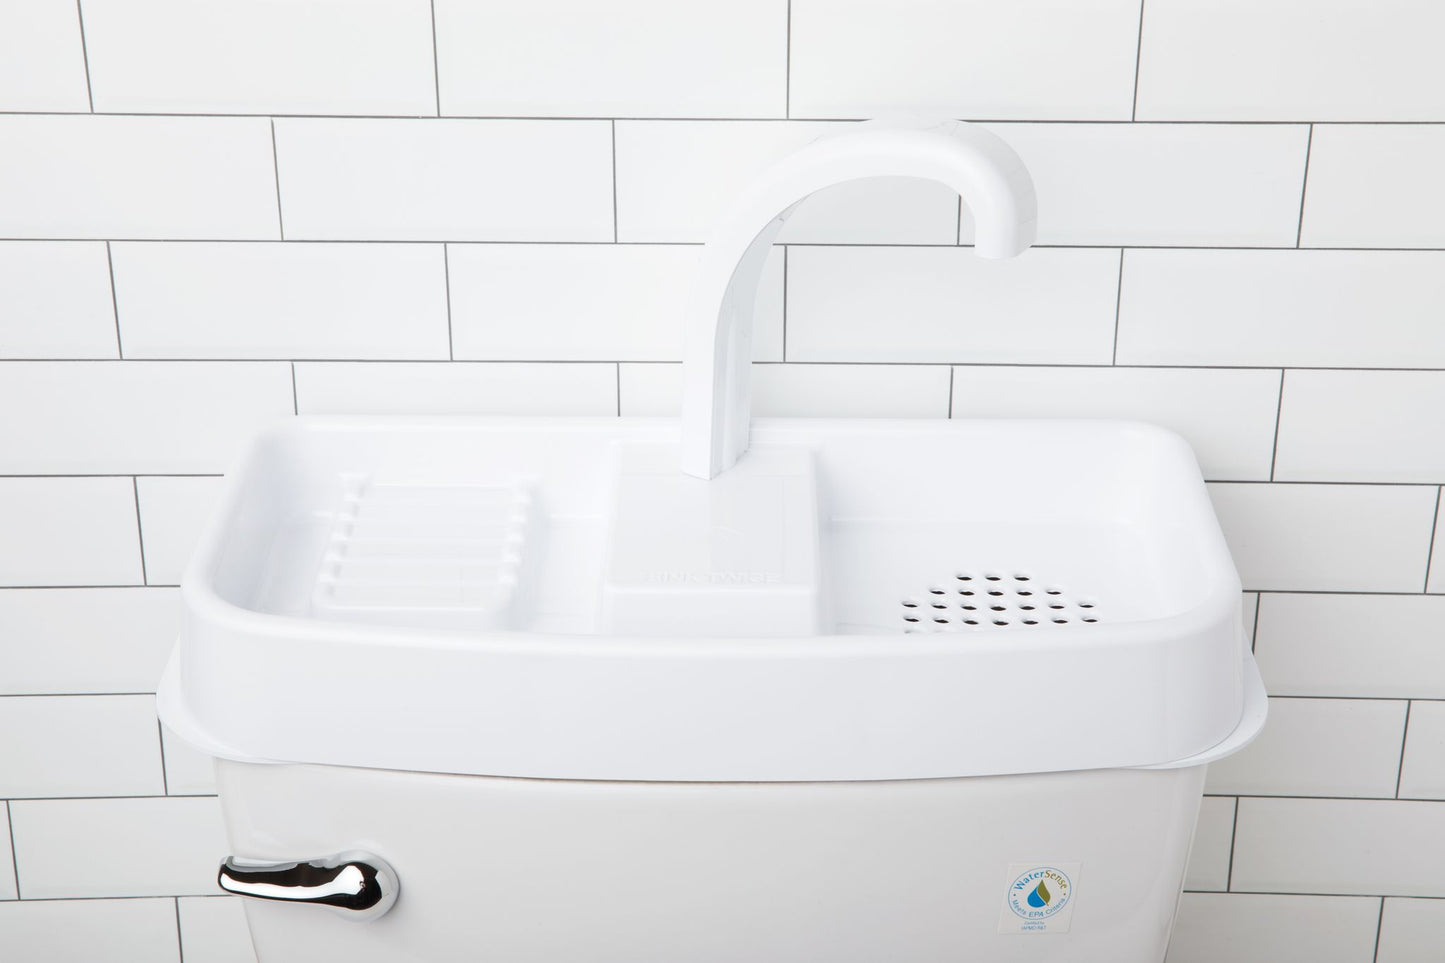 Sink Twice Adaptable (Blemished) for toilet tanks 16.8" - 20.3" wide measured with tank lid off